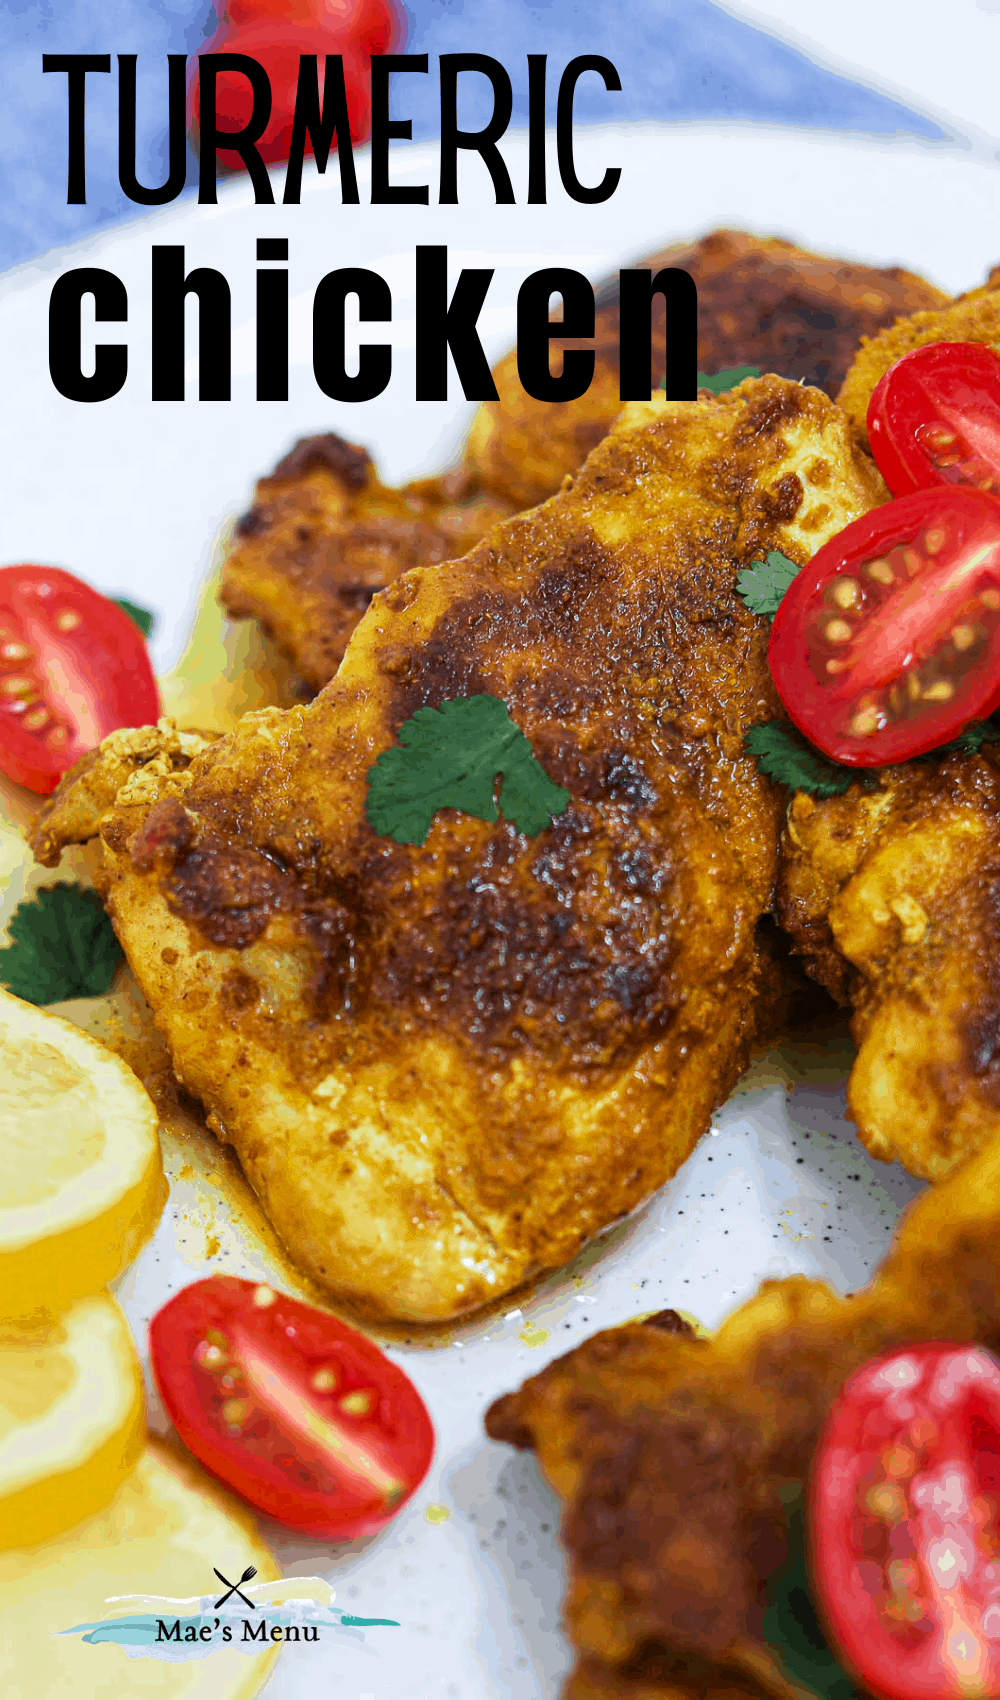 A pinterest pin for turmeric chicken with an up close photo of the chicken on the plate